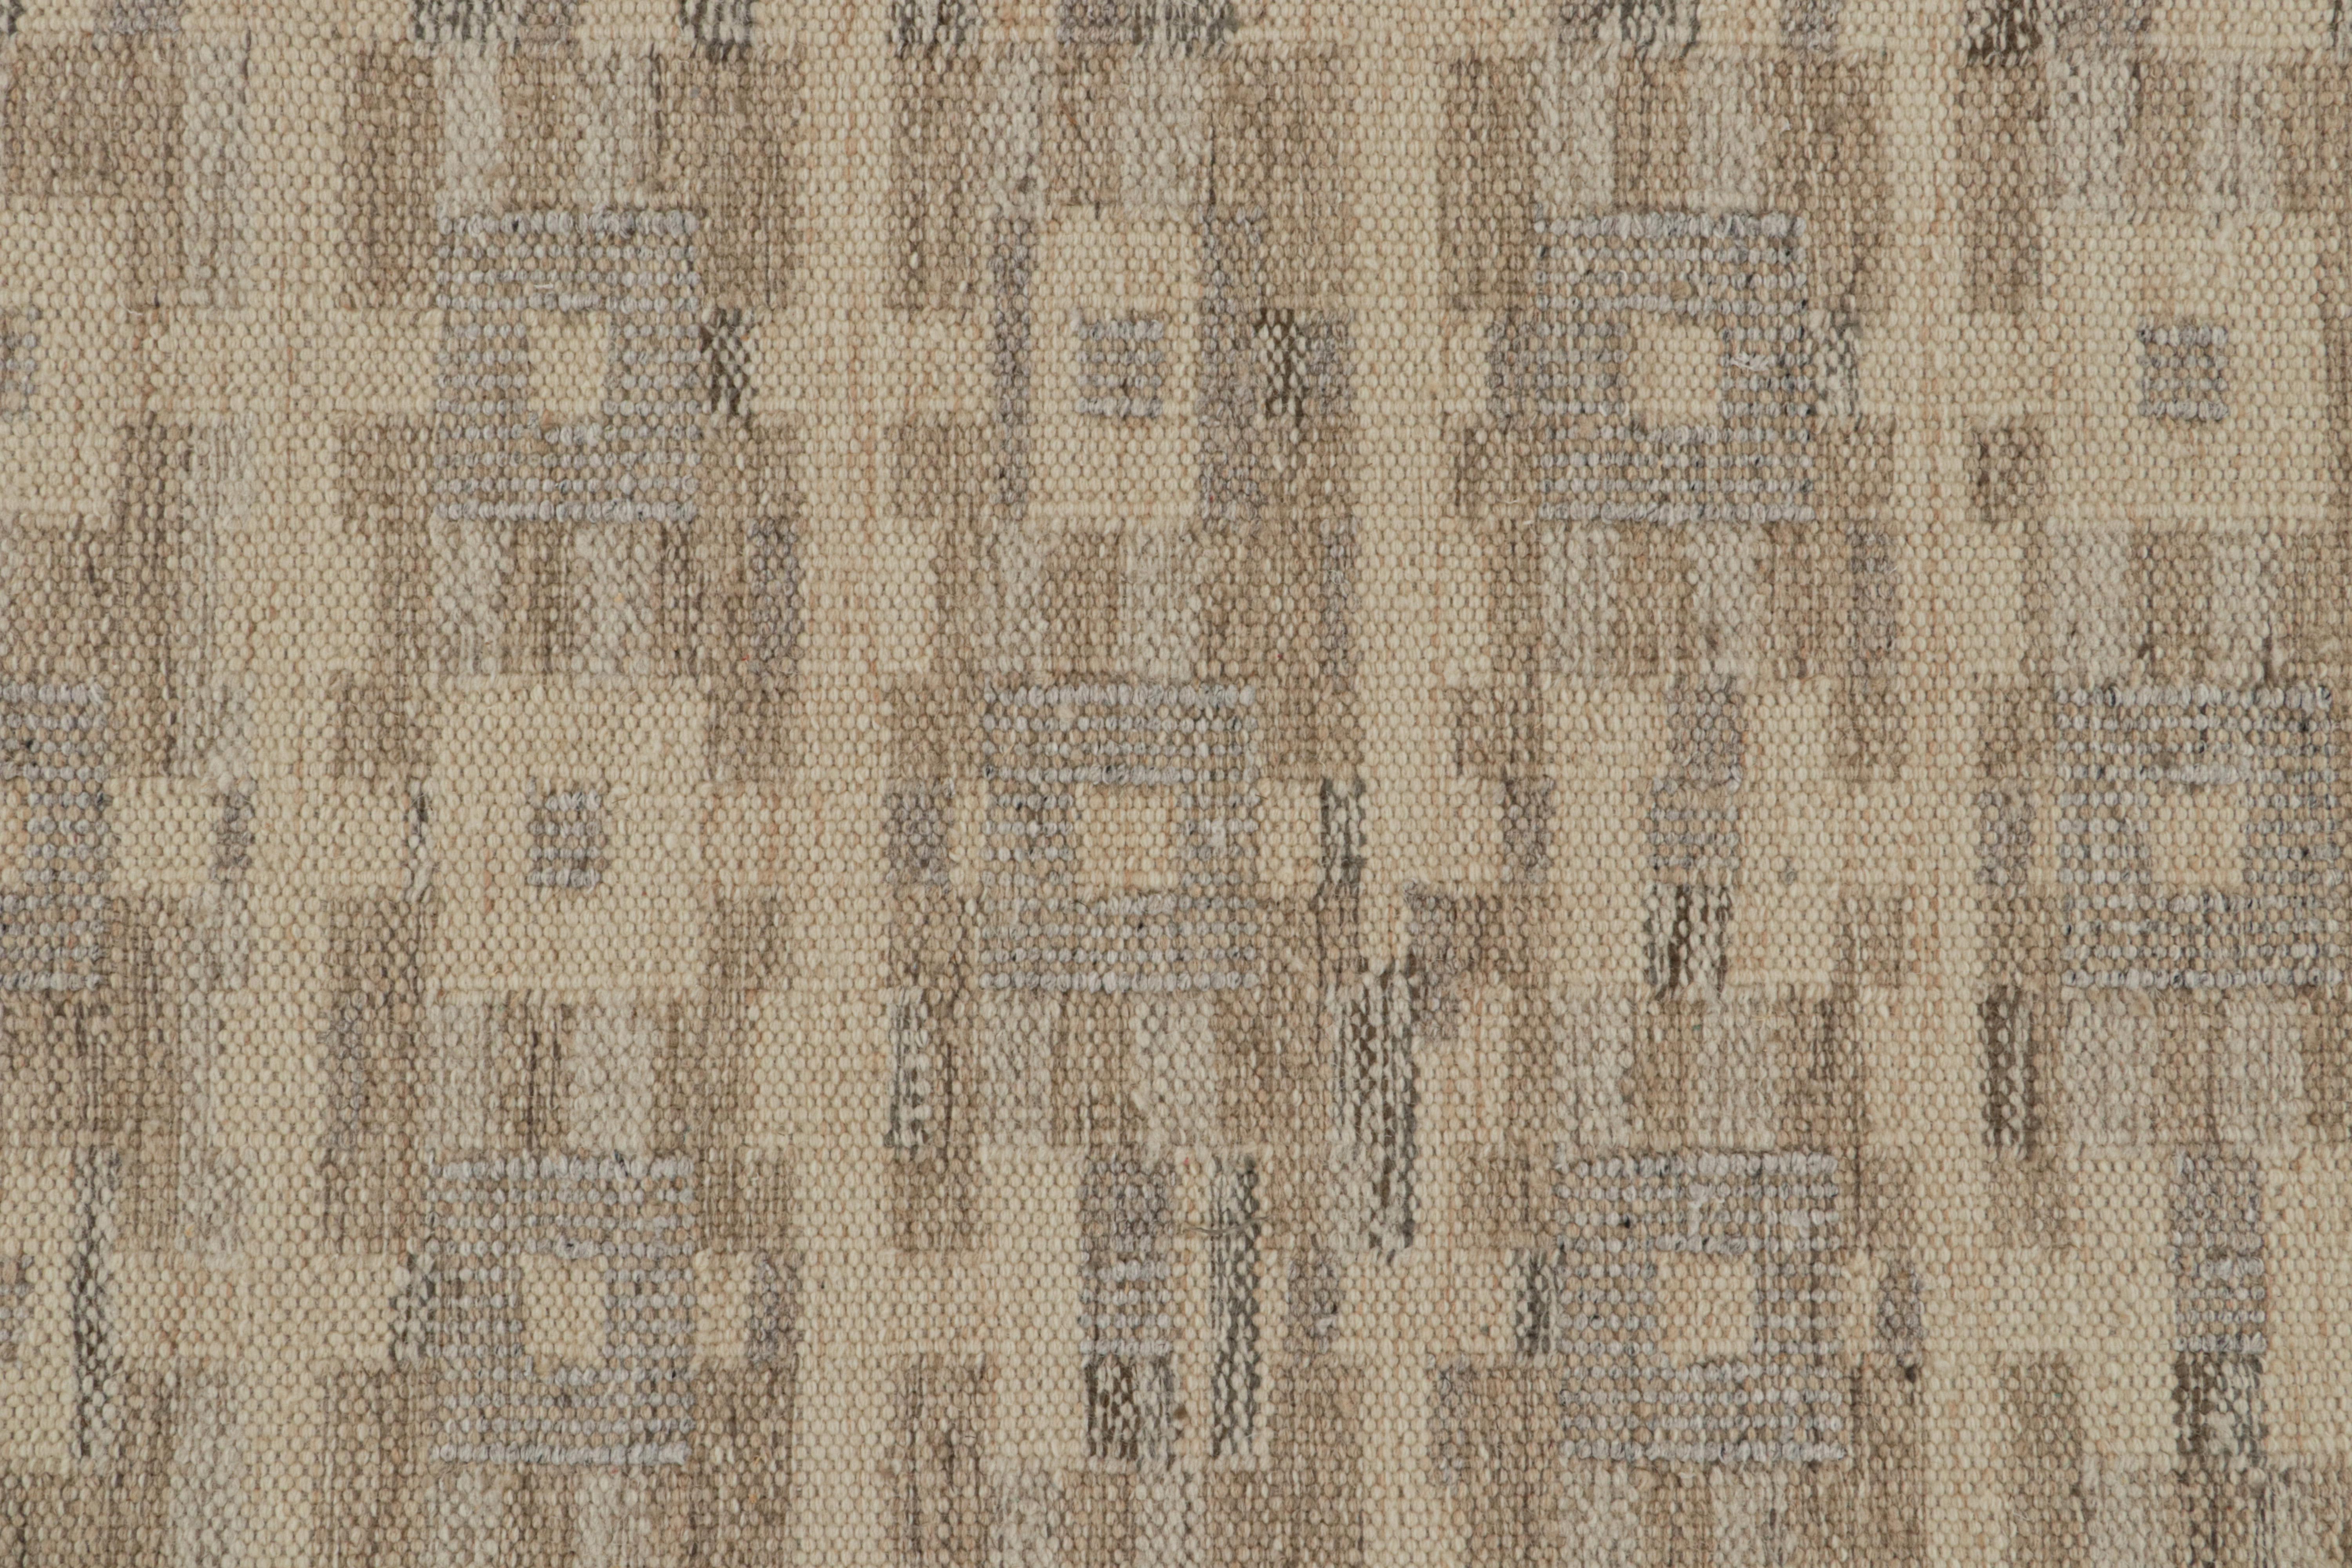 Rug & Kilim’s Scandinavian Style Kilim in Beige-Brown & gray Patterns In New Condition For Sale In Long Island City, NY